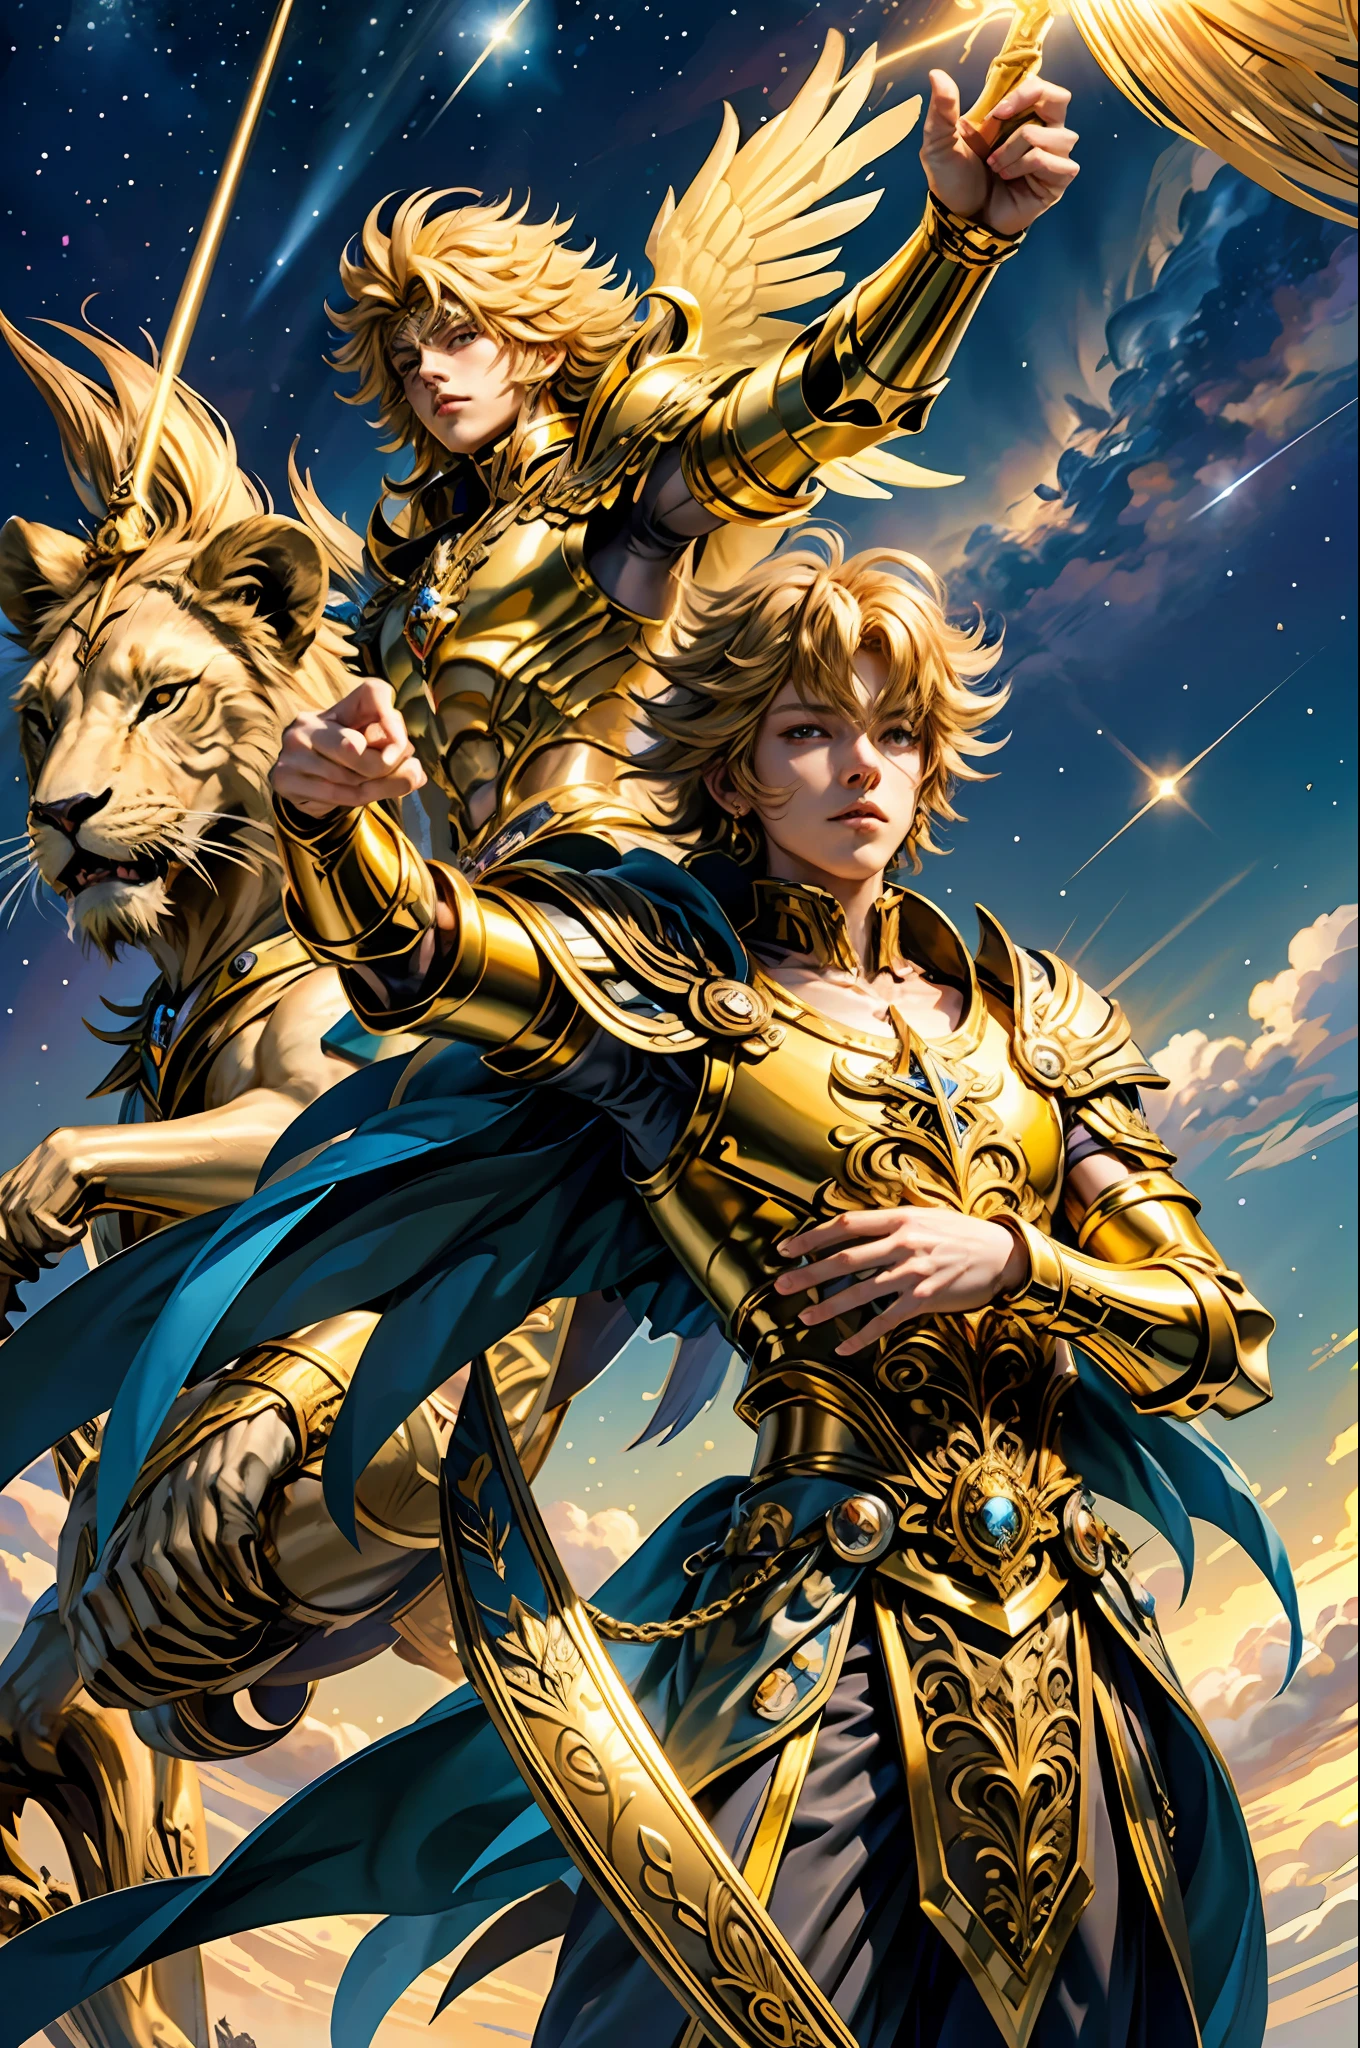 （tmasterpiece，top-quality，best qualityer，Use the magic golden Leo astrolabe，Yellow-haired people，Next to the lion，Knights of the Zodiac：Saint Seiya，llight rayagical，sci-fy，dream magical，wings，ray of lights，Water magic，